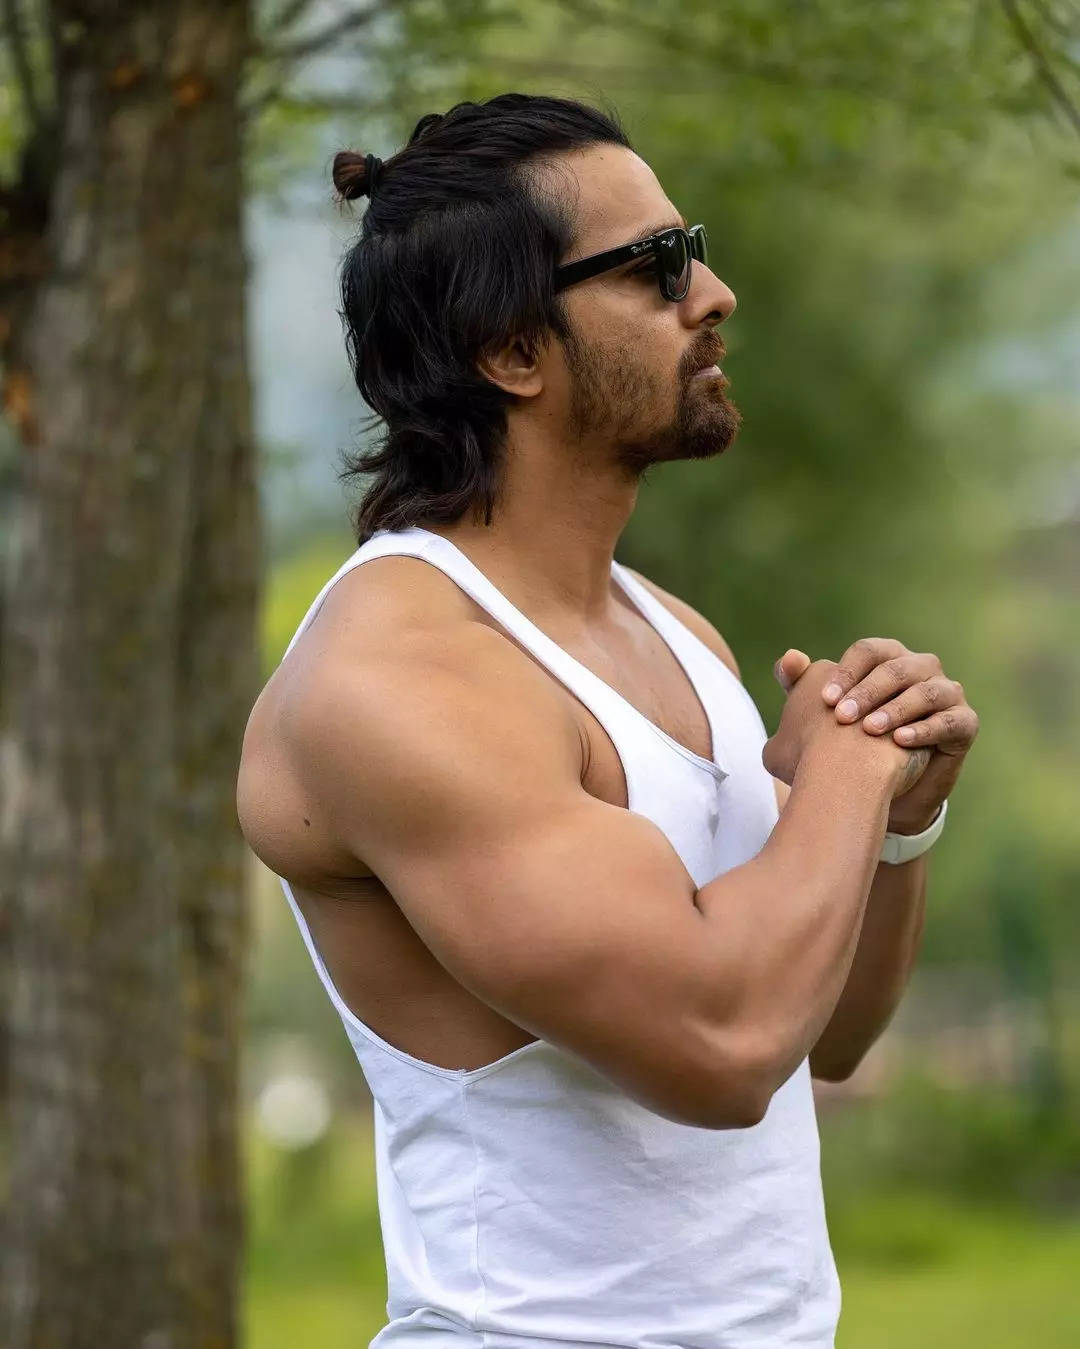 Ultimate Compilation Of Over 999 Harshvardhan Rane Images Spectacular Collection In Full 4k